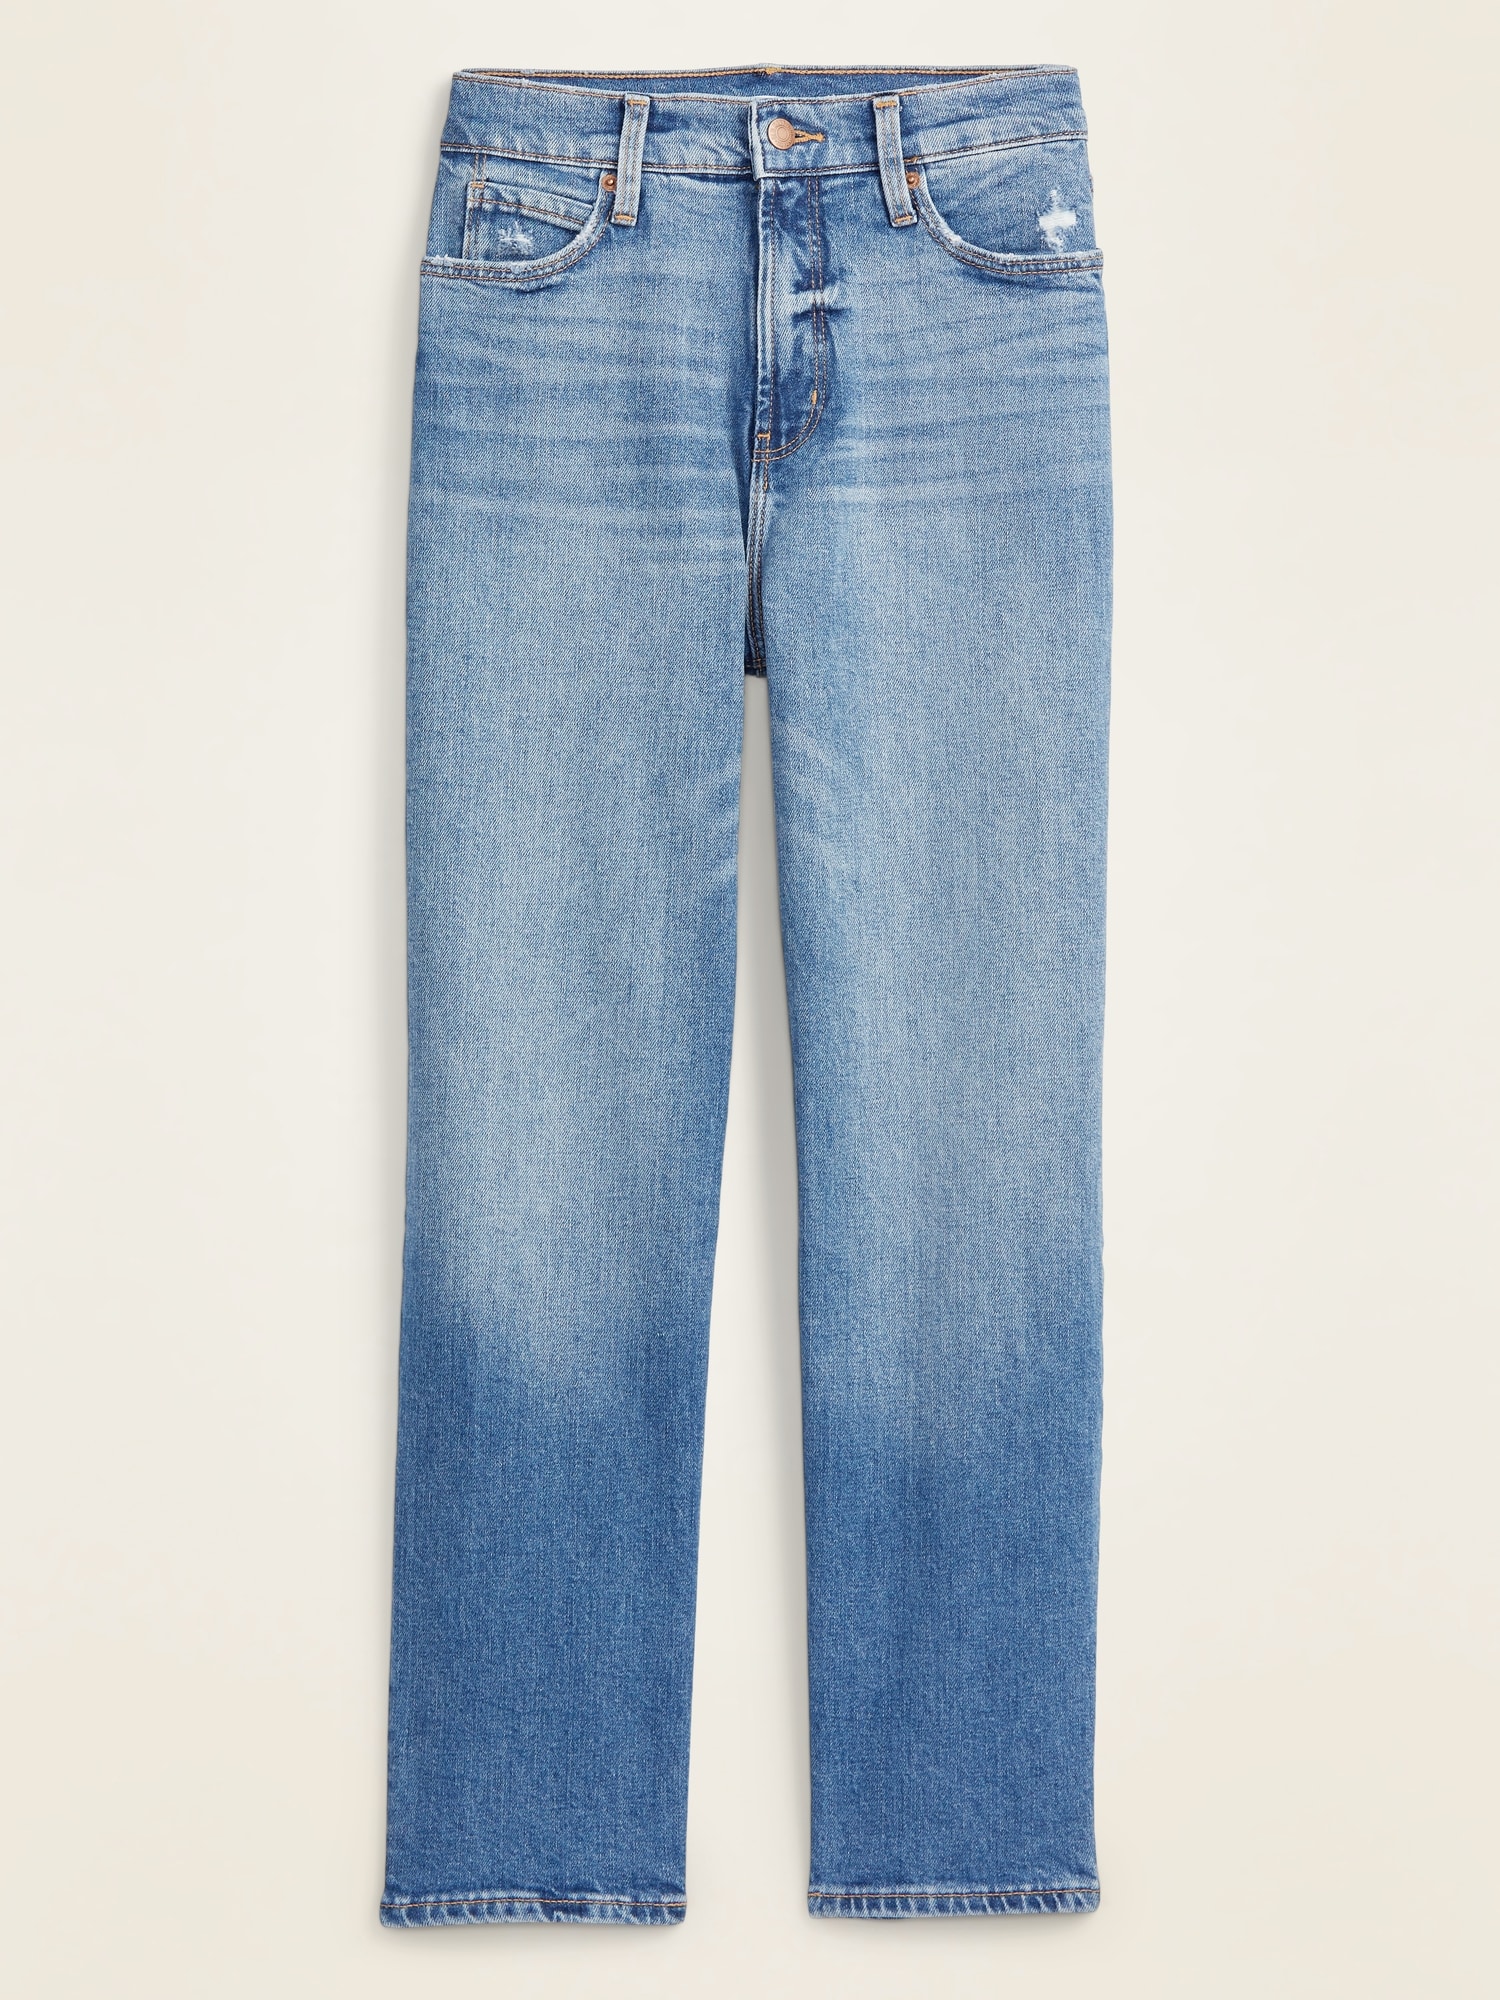 high waisted jeans with belt loops